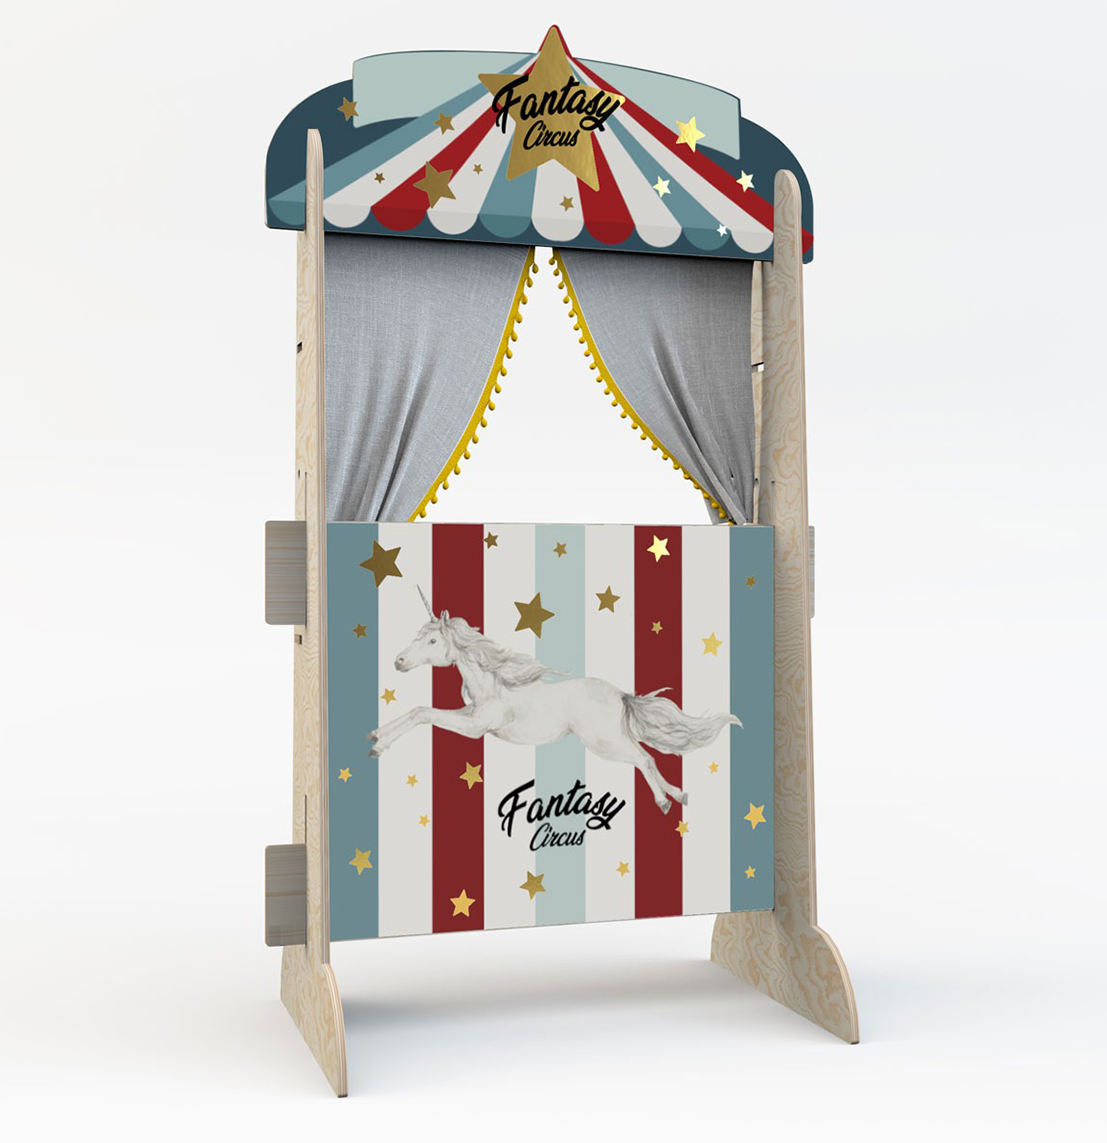 FANTASY Circus Retro! Toy And Bookstand In One 135CM